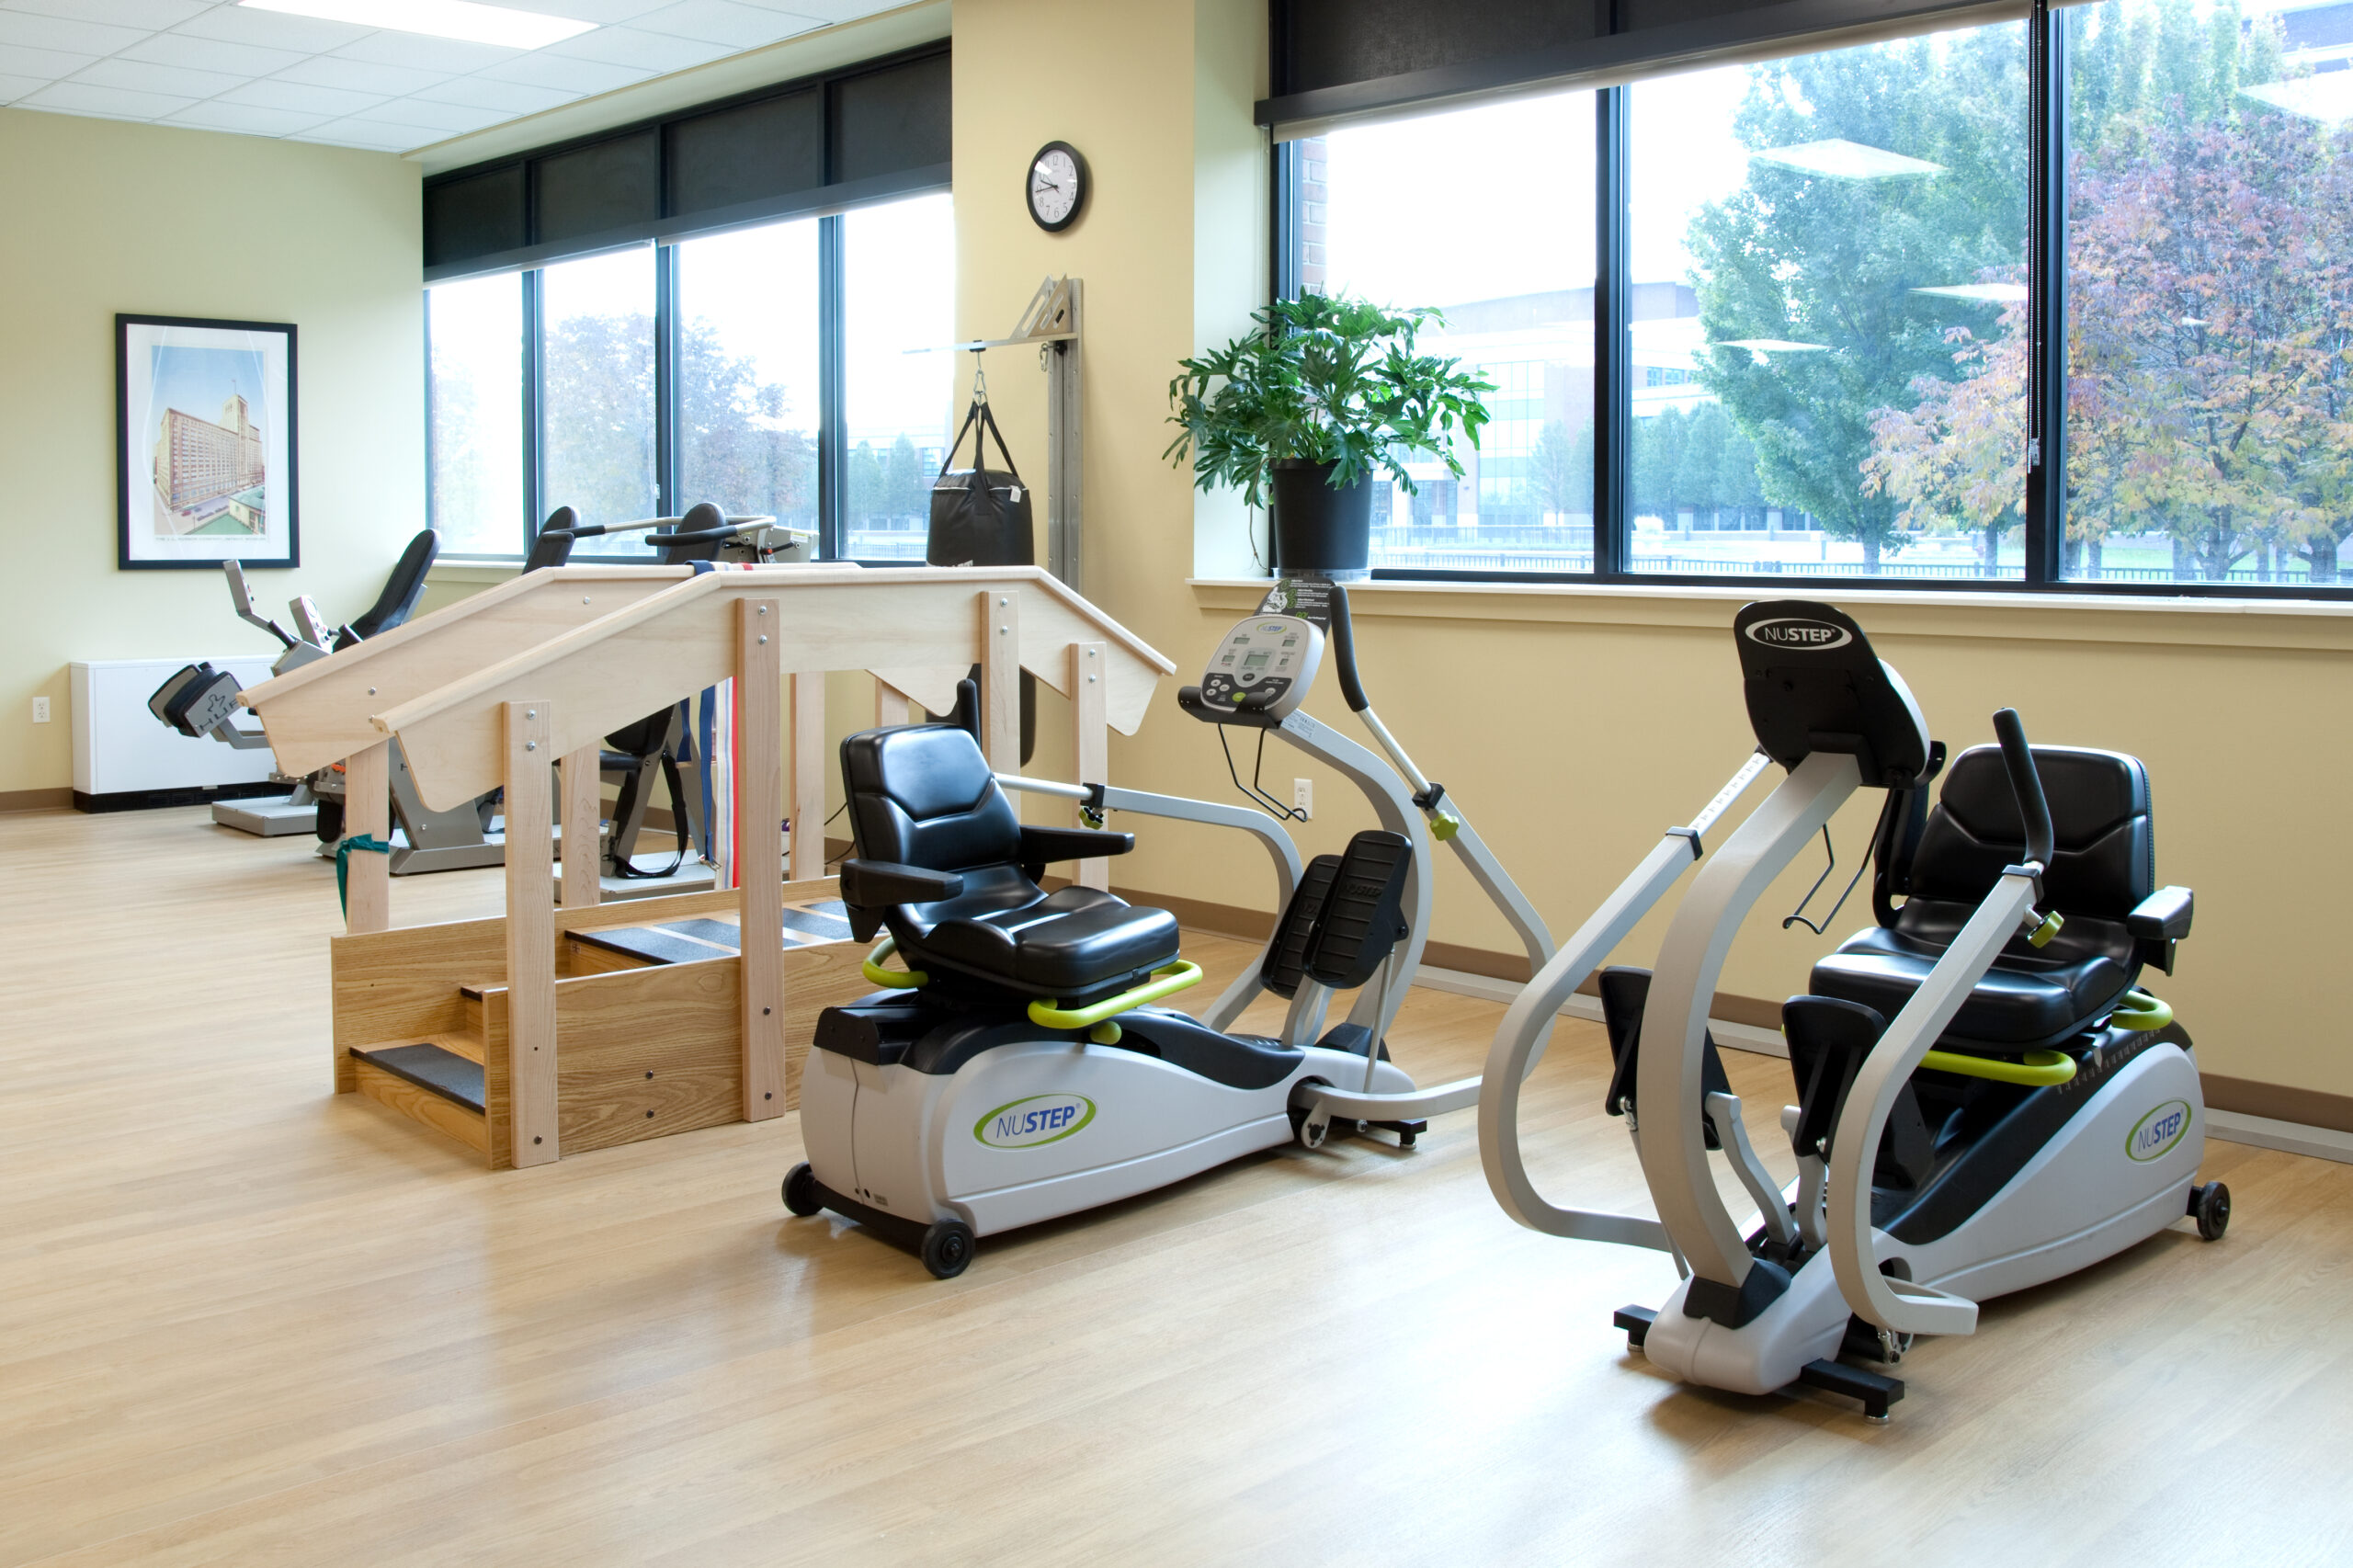 Interior of the PVM Thome Rivertown Neighborhood Exercise Room. Exercise machines, a stair climber, and a boxing bag can be seen.